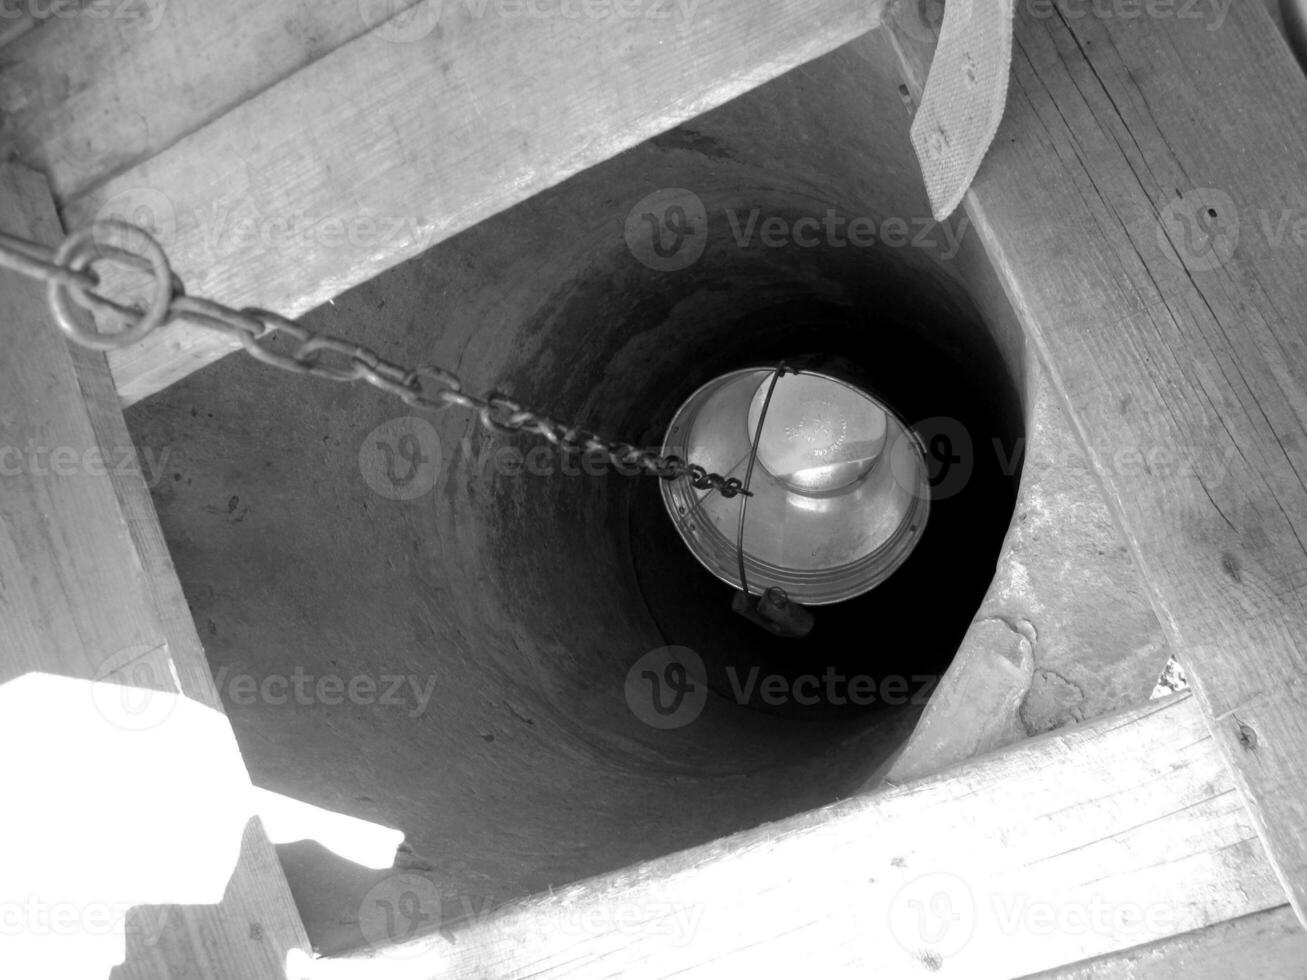 Old well with iron bucket on long forged chain for clean drinking water photo